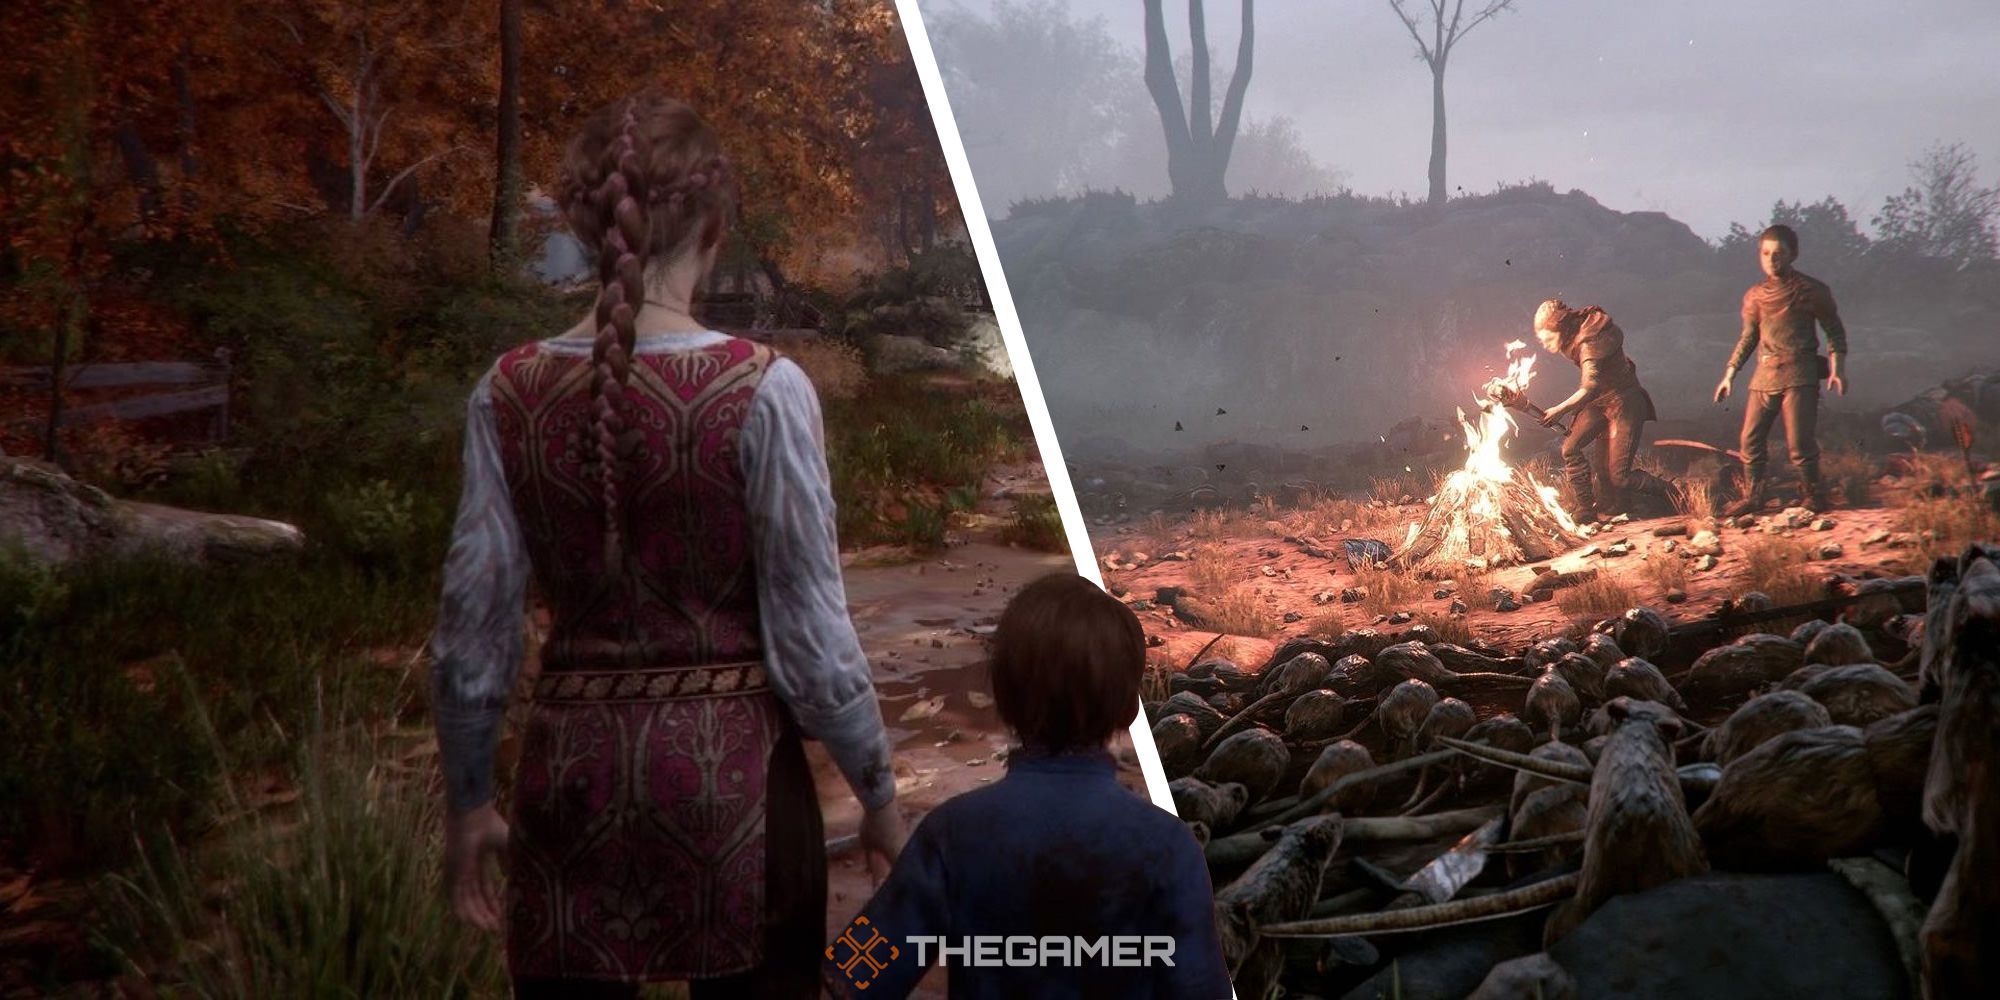 A Plague Tale: Innocence is getting enhanced PS5 and Xbox Series versions